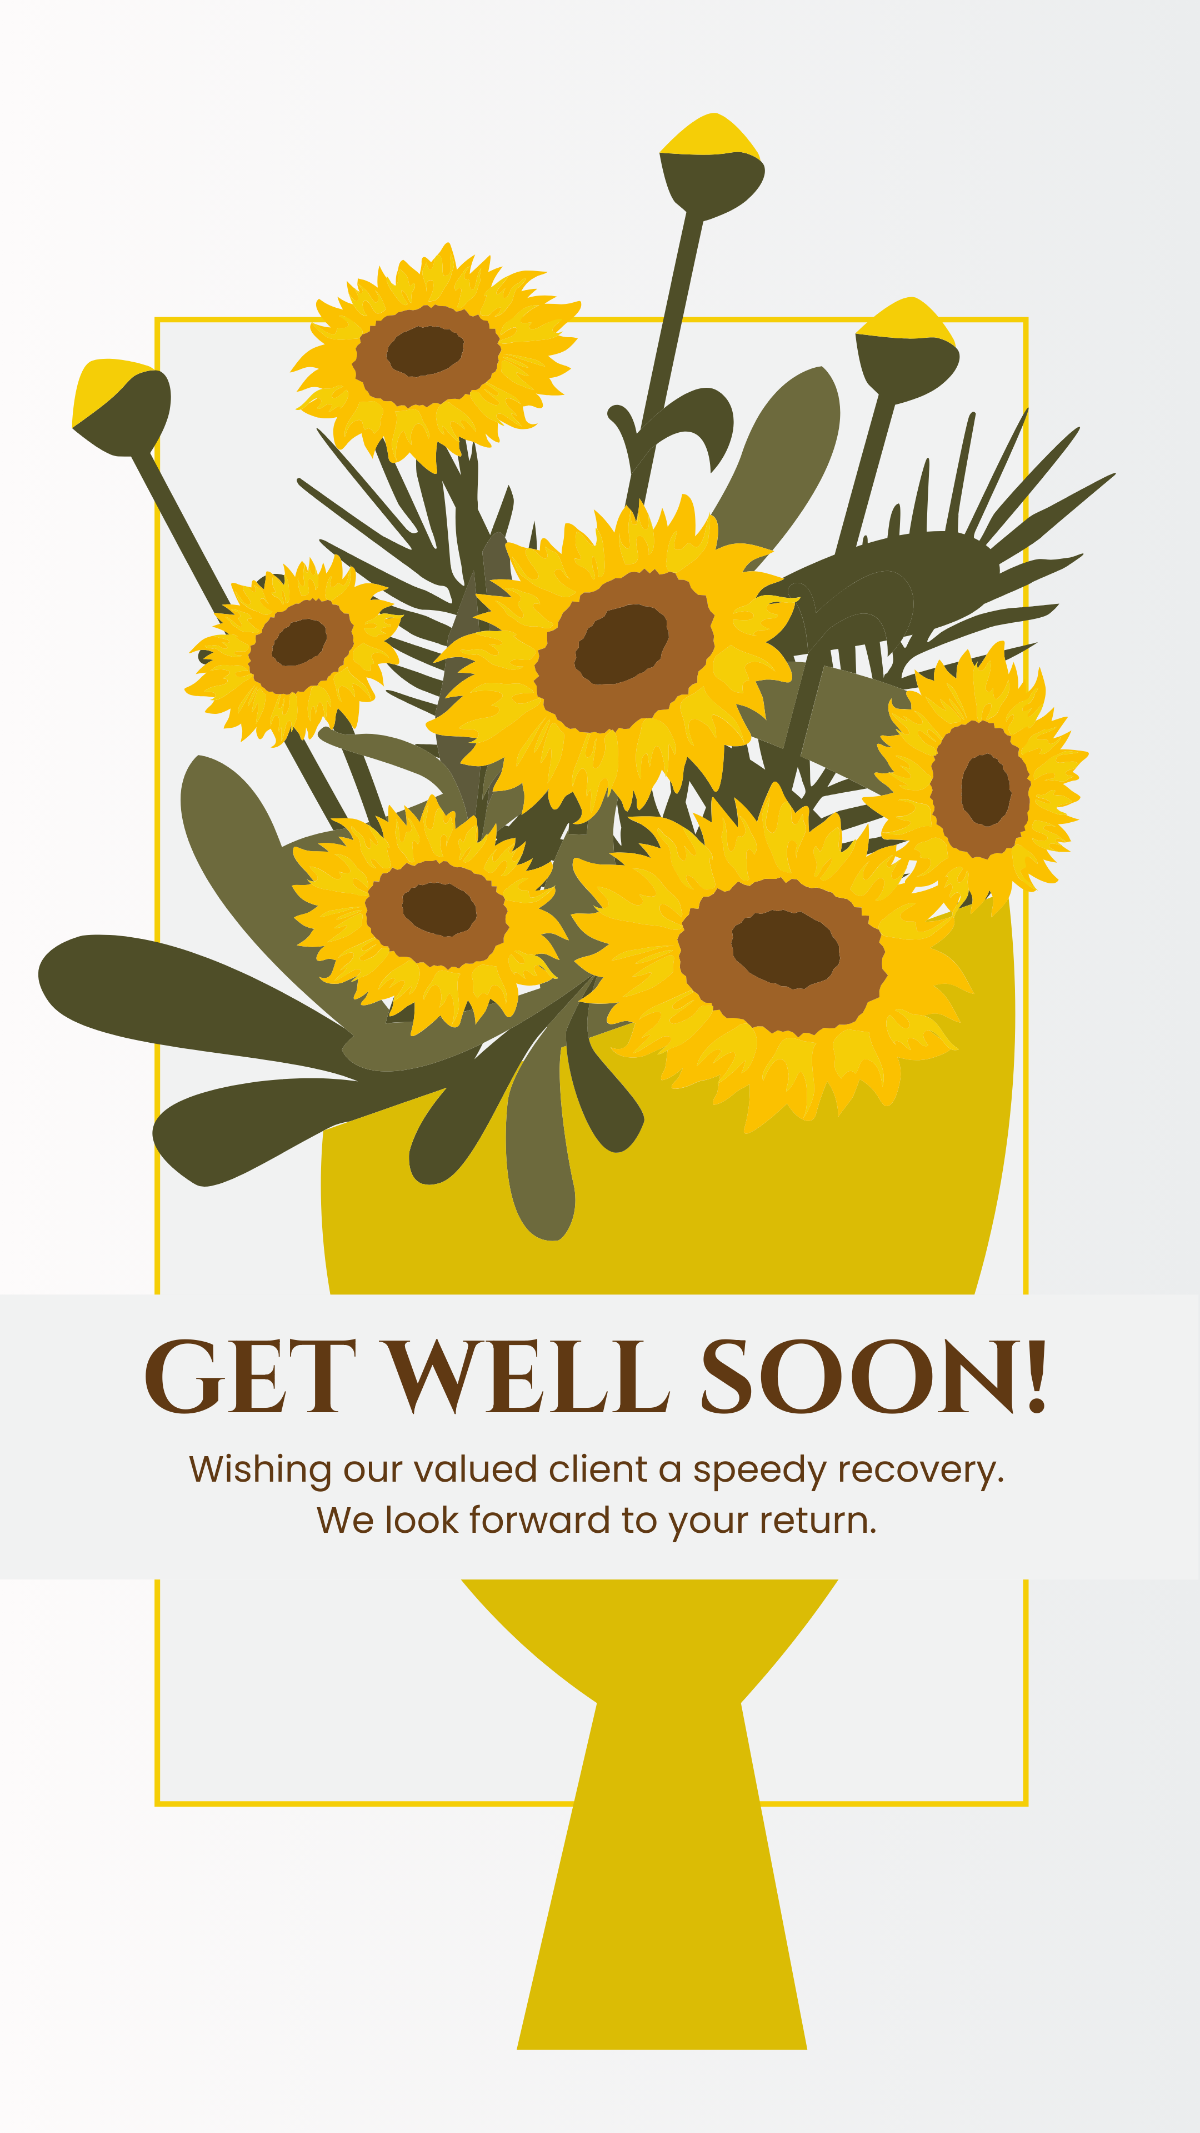 Free Get Well Soon Message For Client